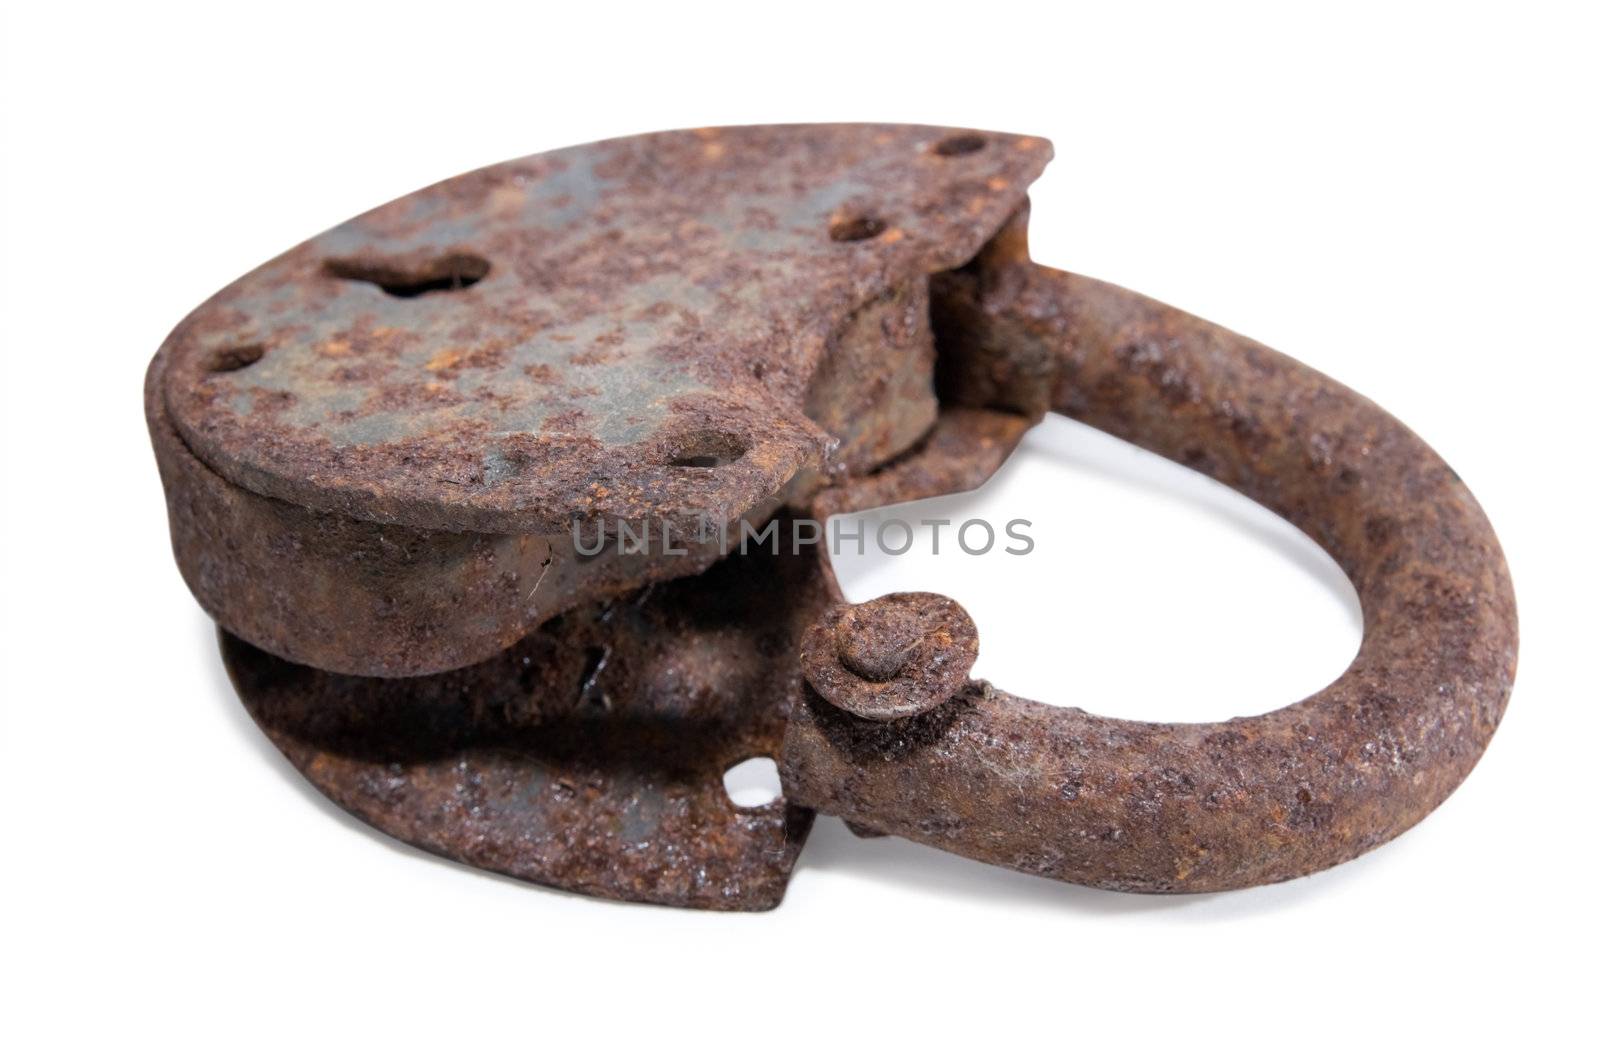 Very rusted old lock on white background